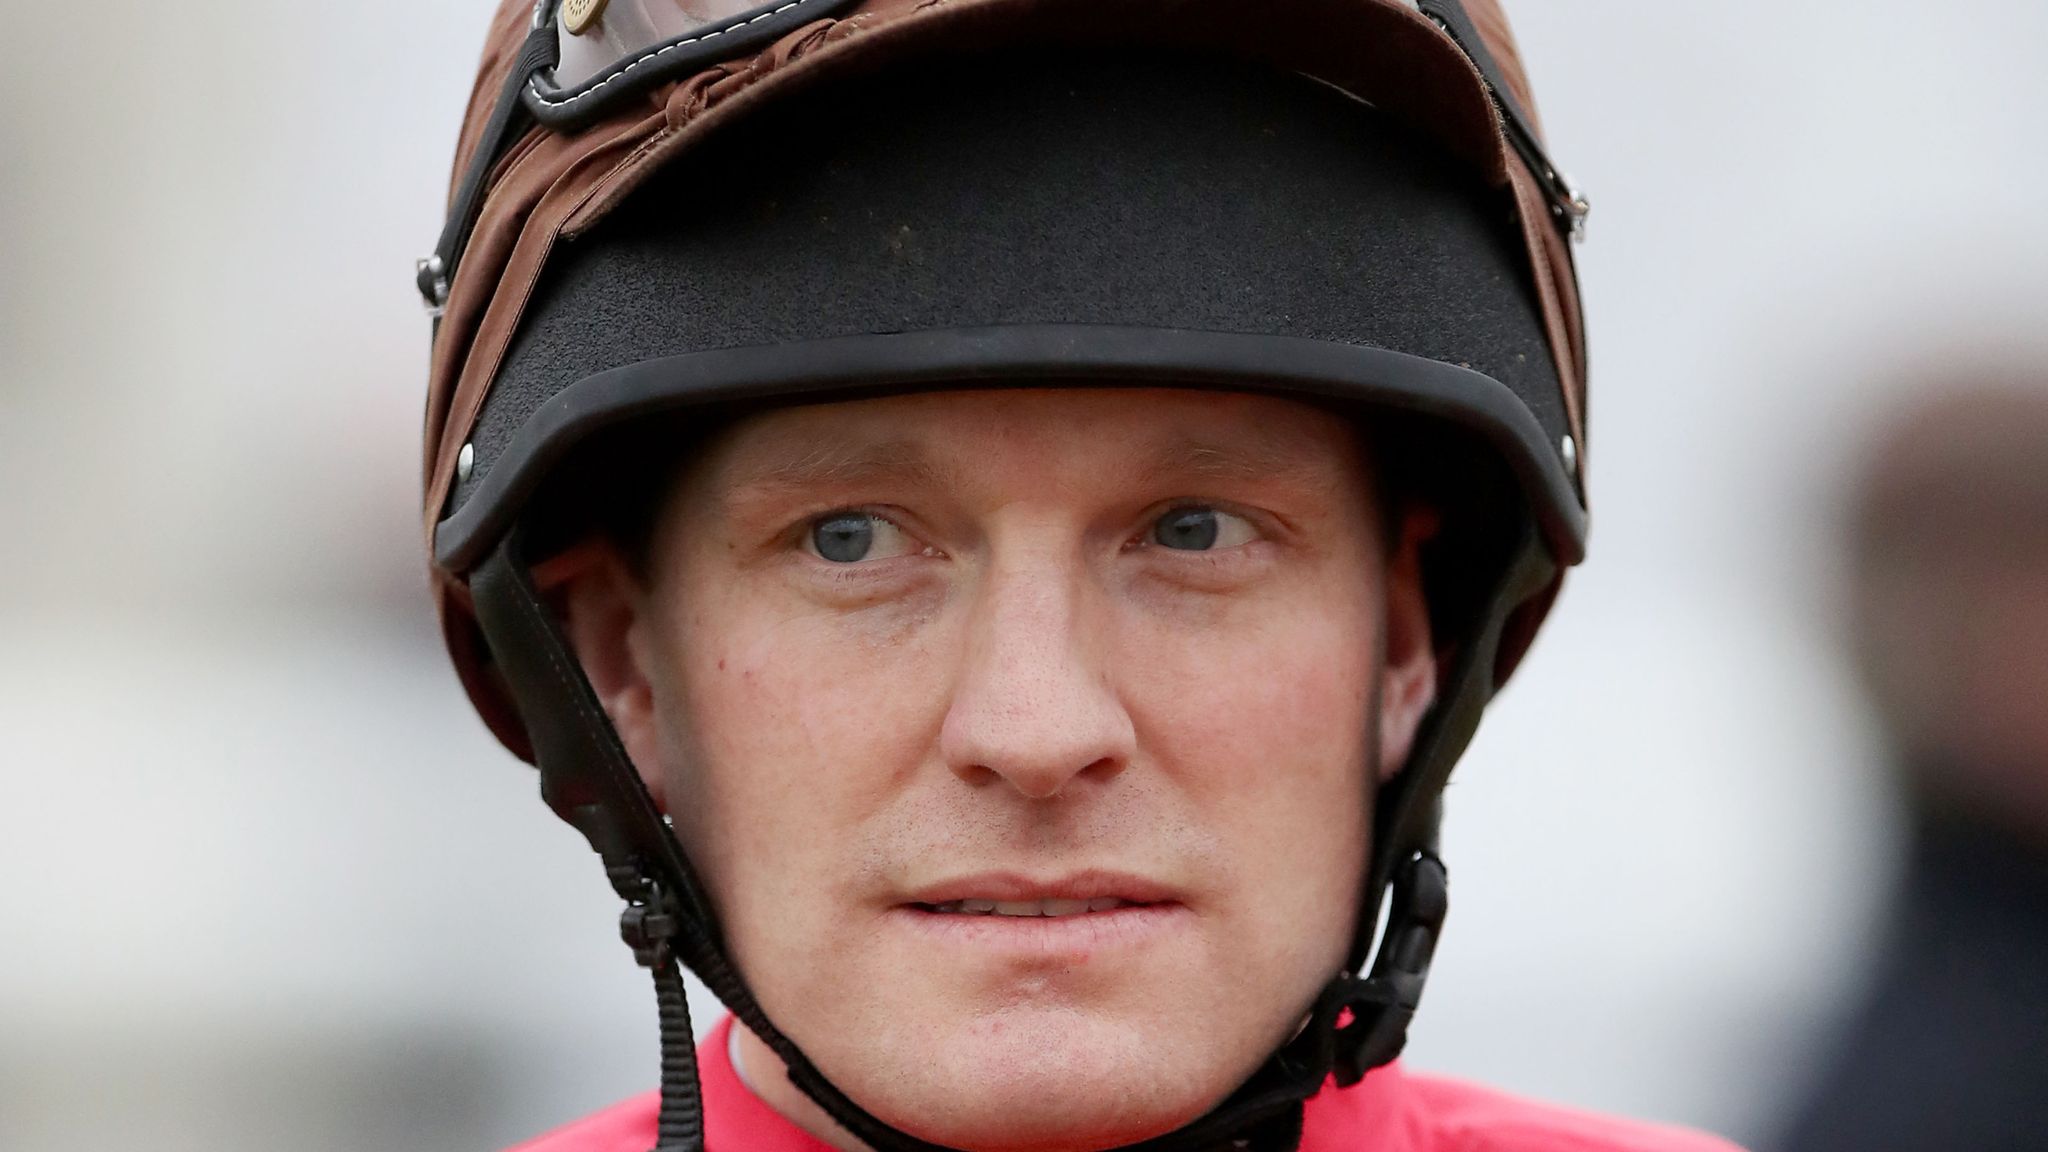 Amateur Riders Ruled Out Of Action From Saturday Racing News Sky Sports